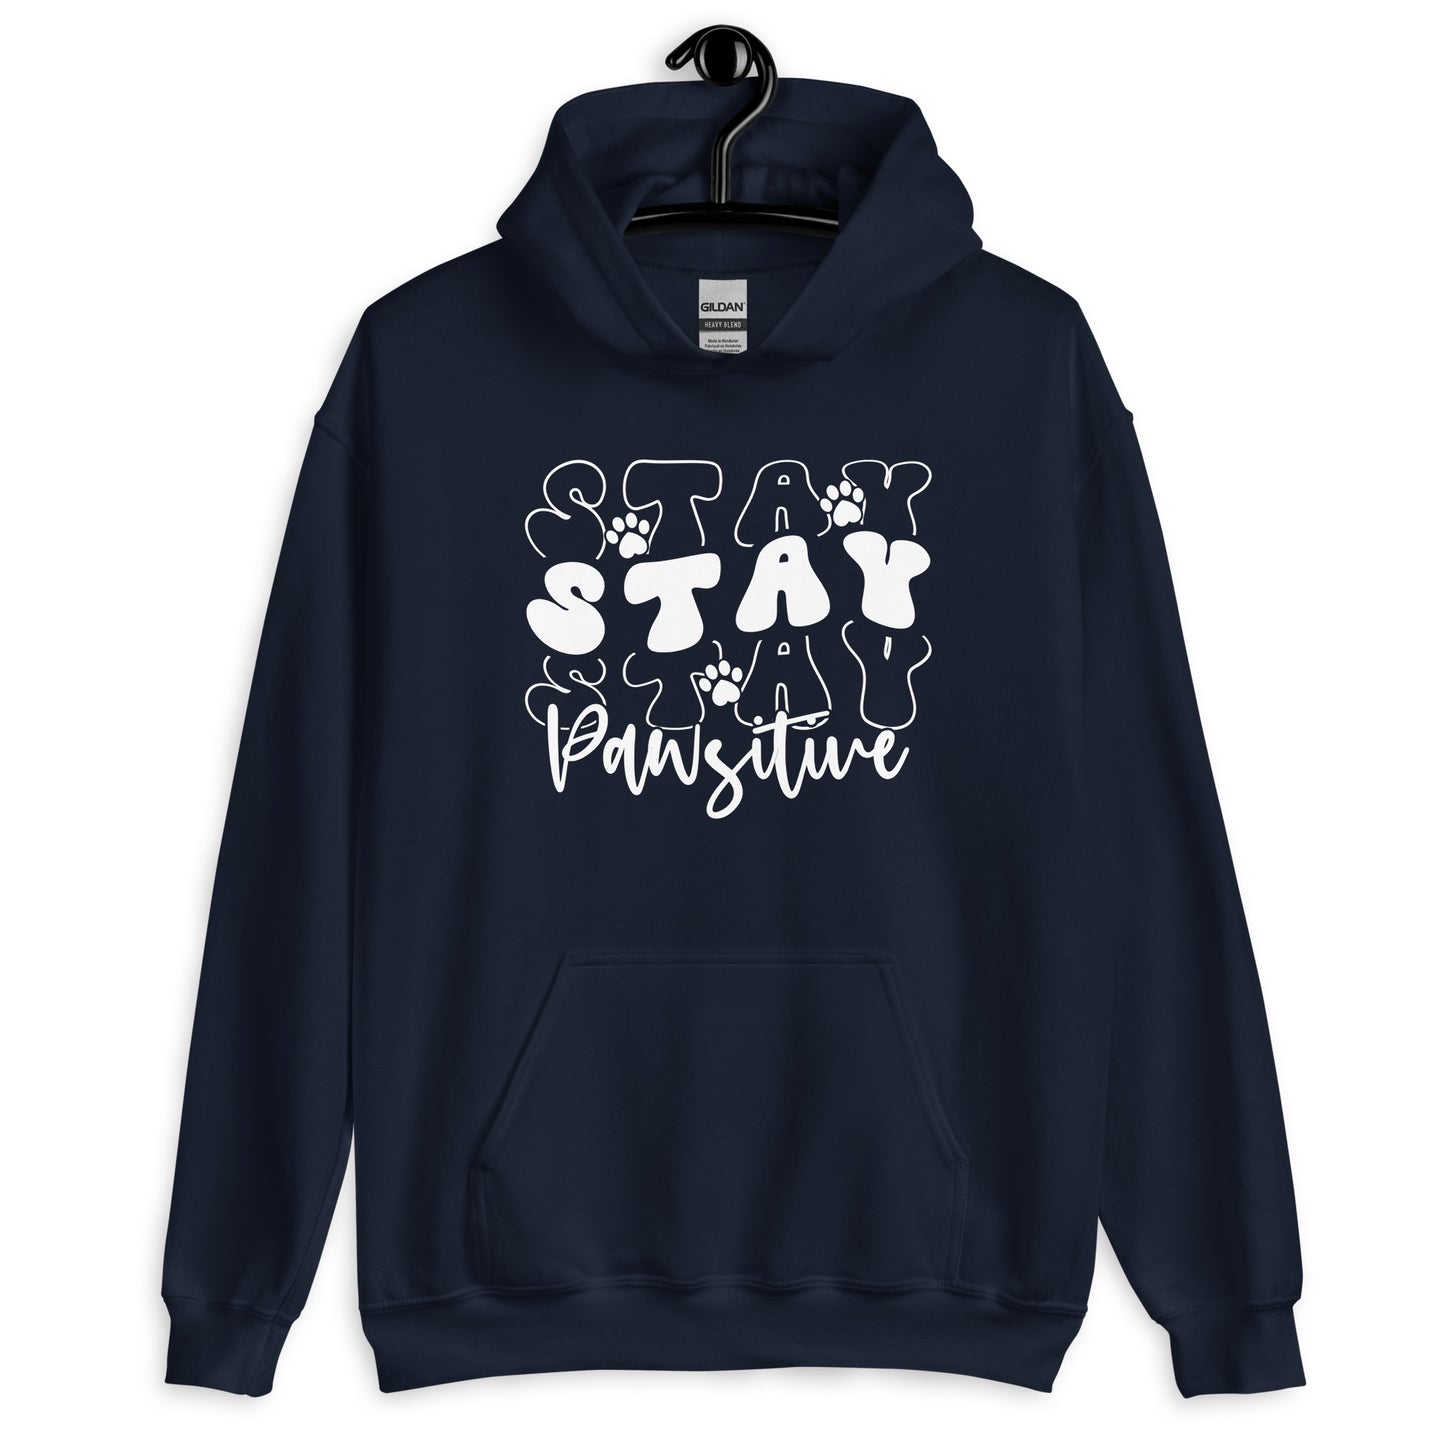 Stay Stay Stay Pawsitive Hoodie